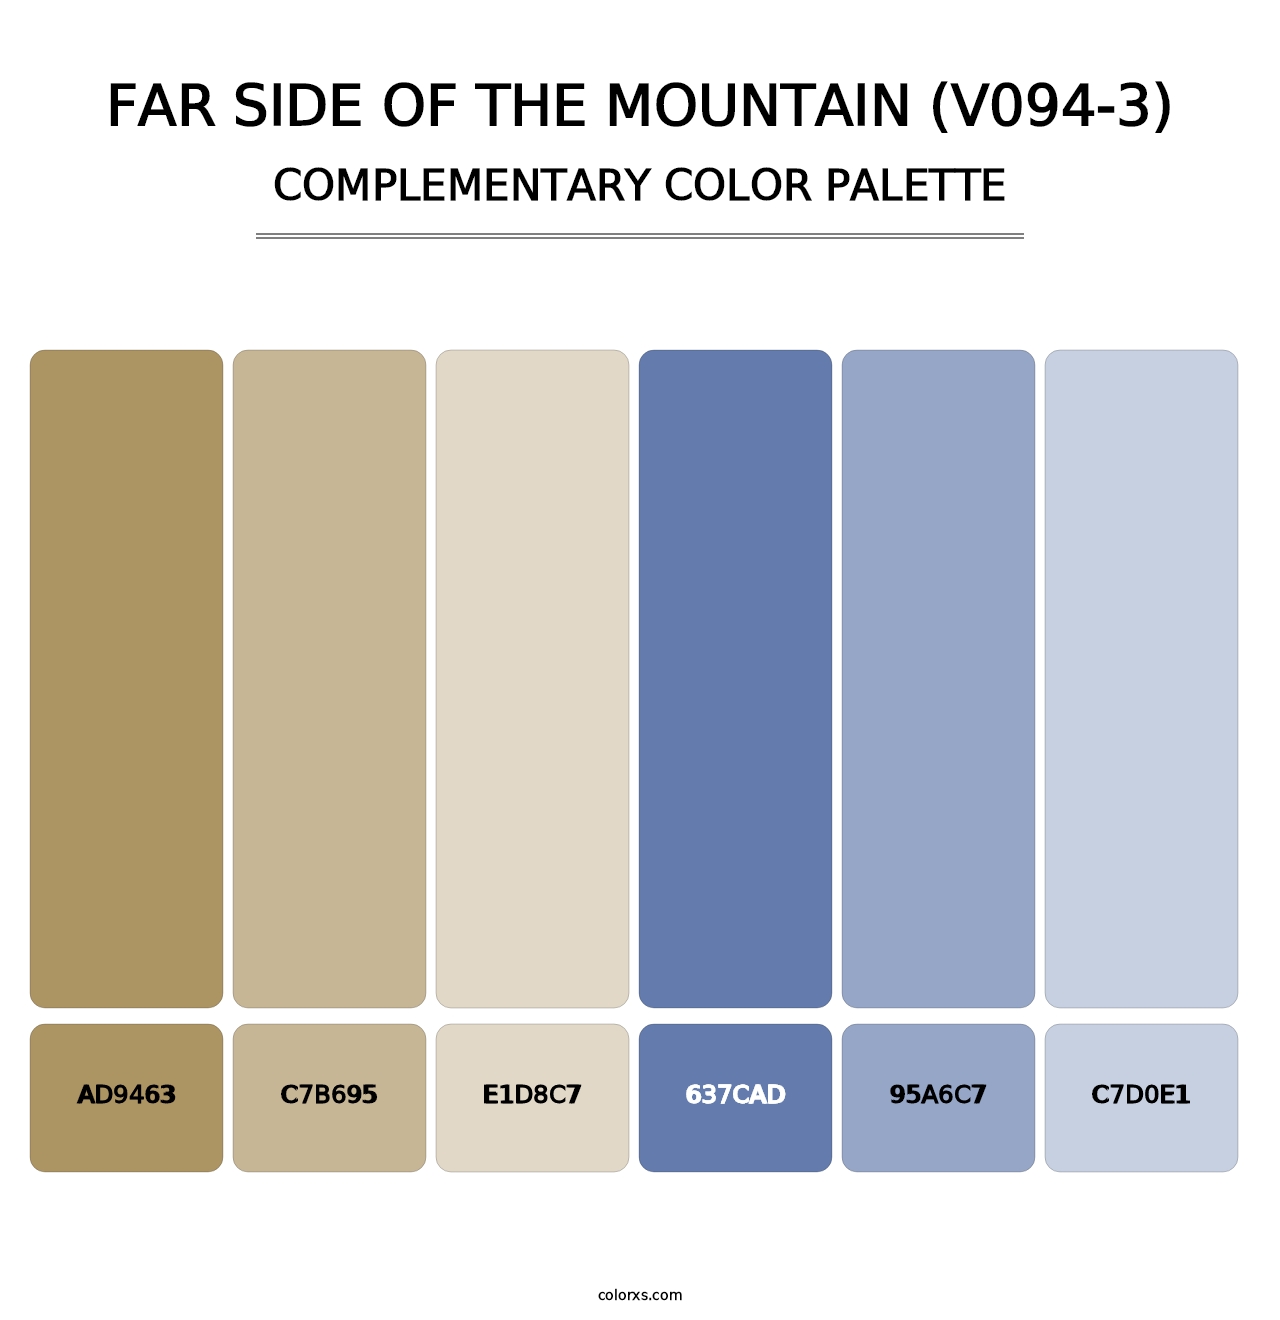 Far Side of the Mountain (V094-3) - Complementary Color Palette